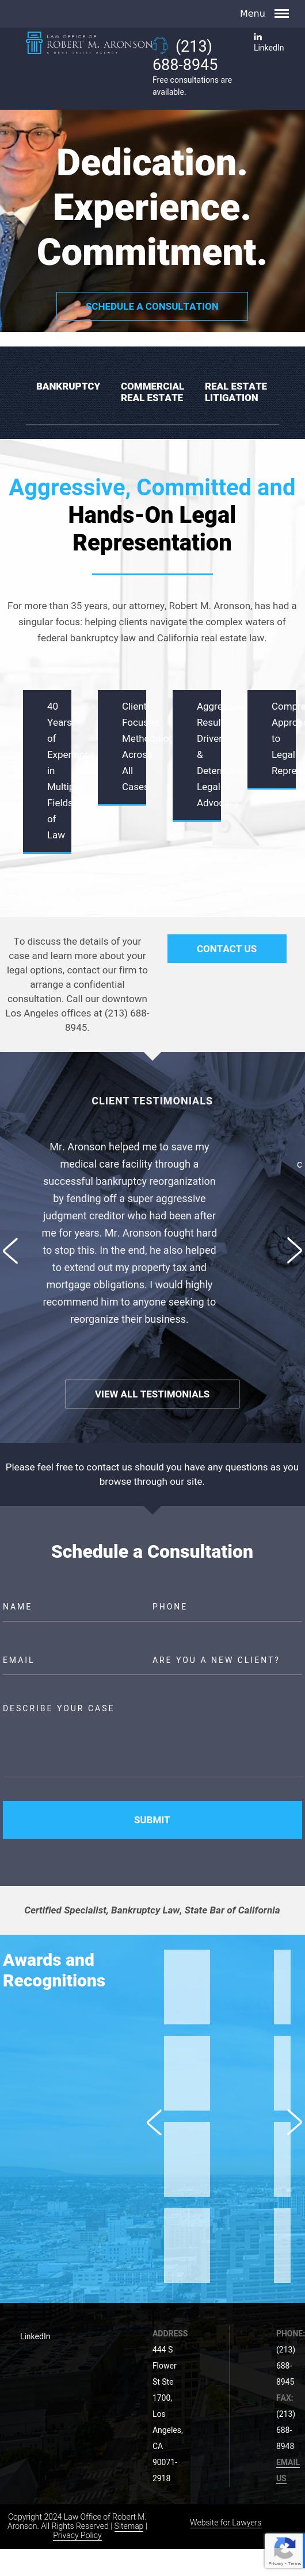 Aronson Law Group - Los Angeles CA Lawyers